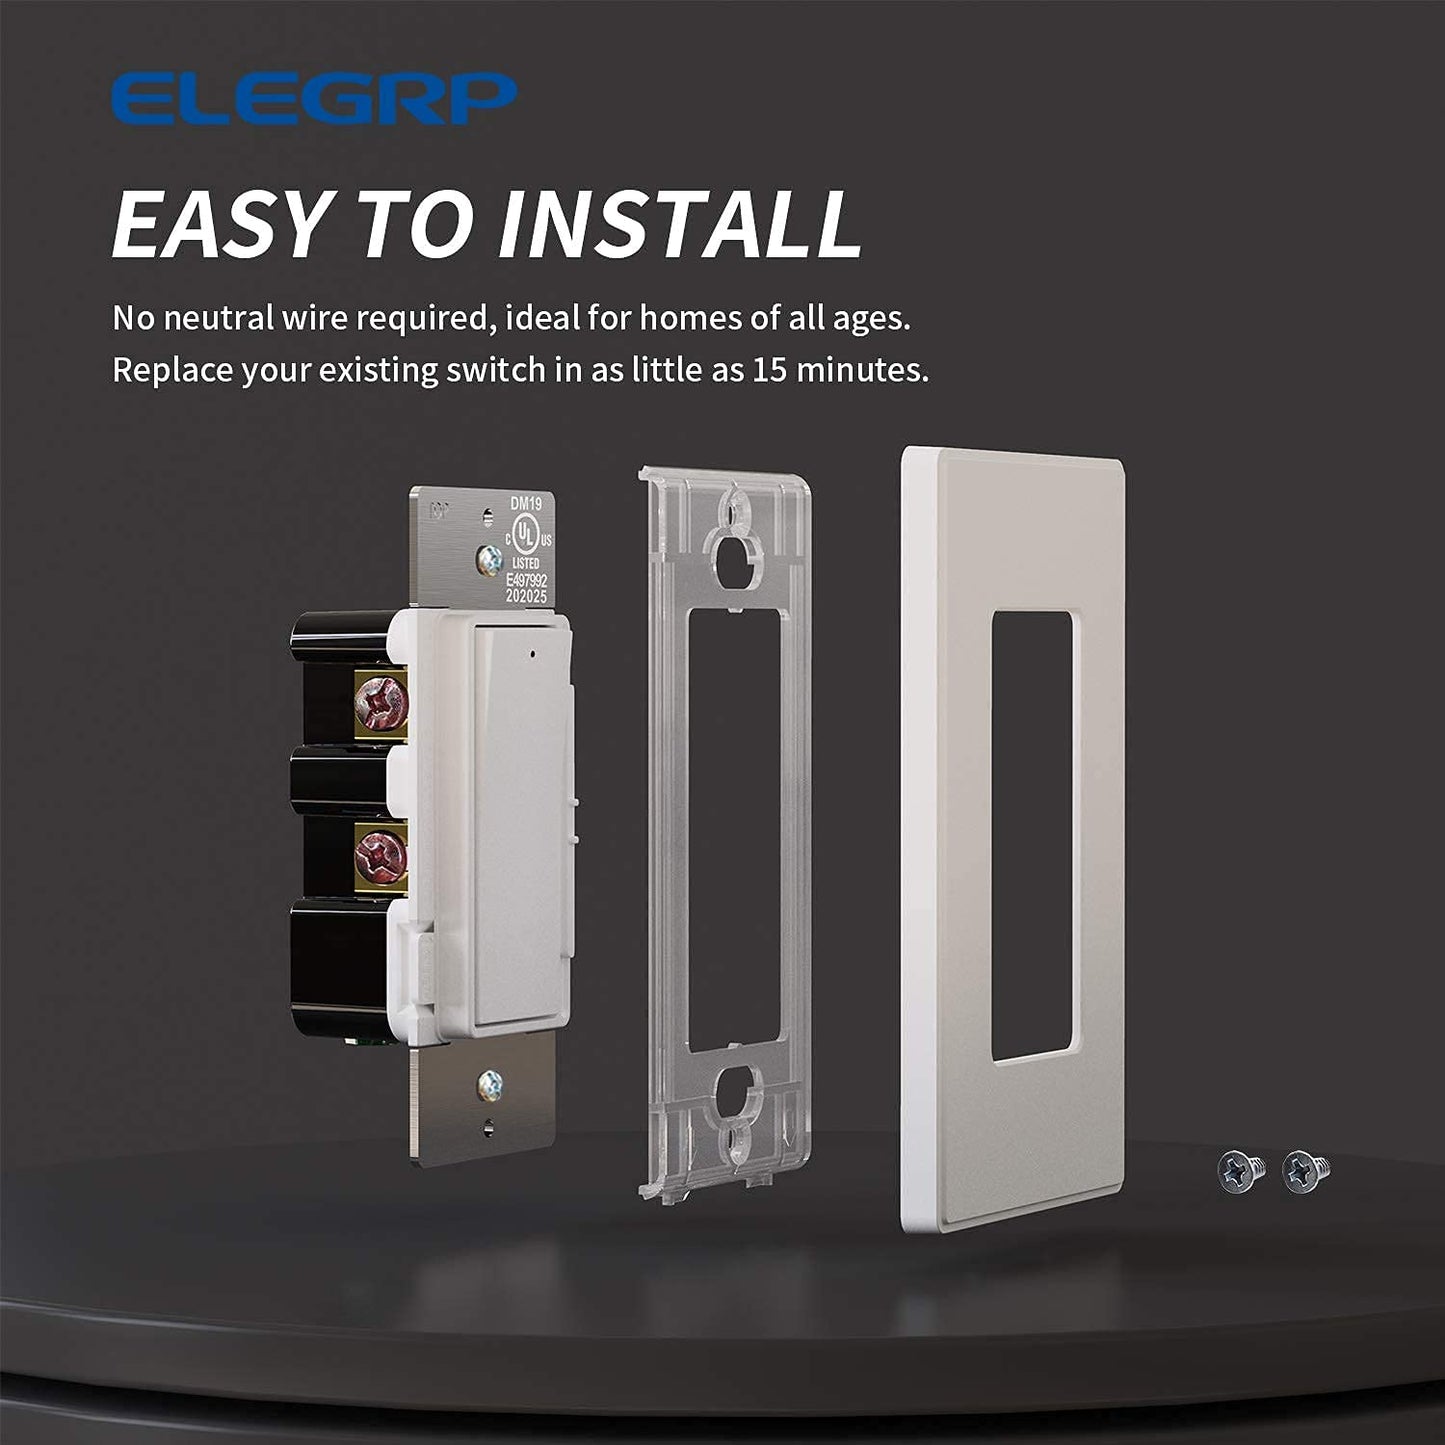 ELEGRP Digital Slide Dimmer Switch  and Wall Plate Included